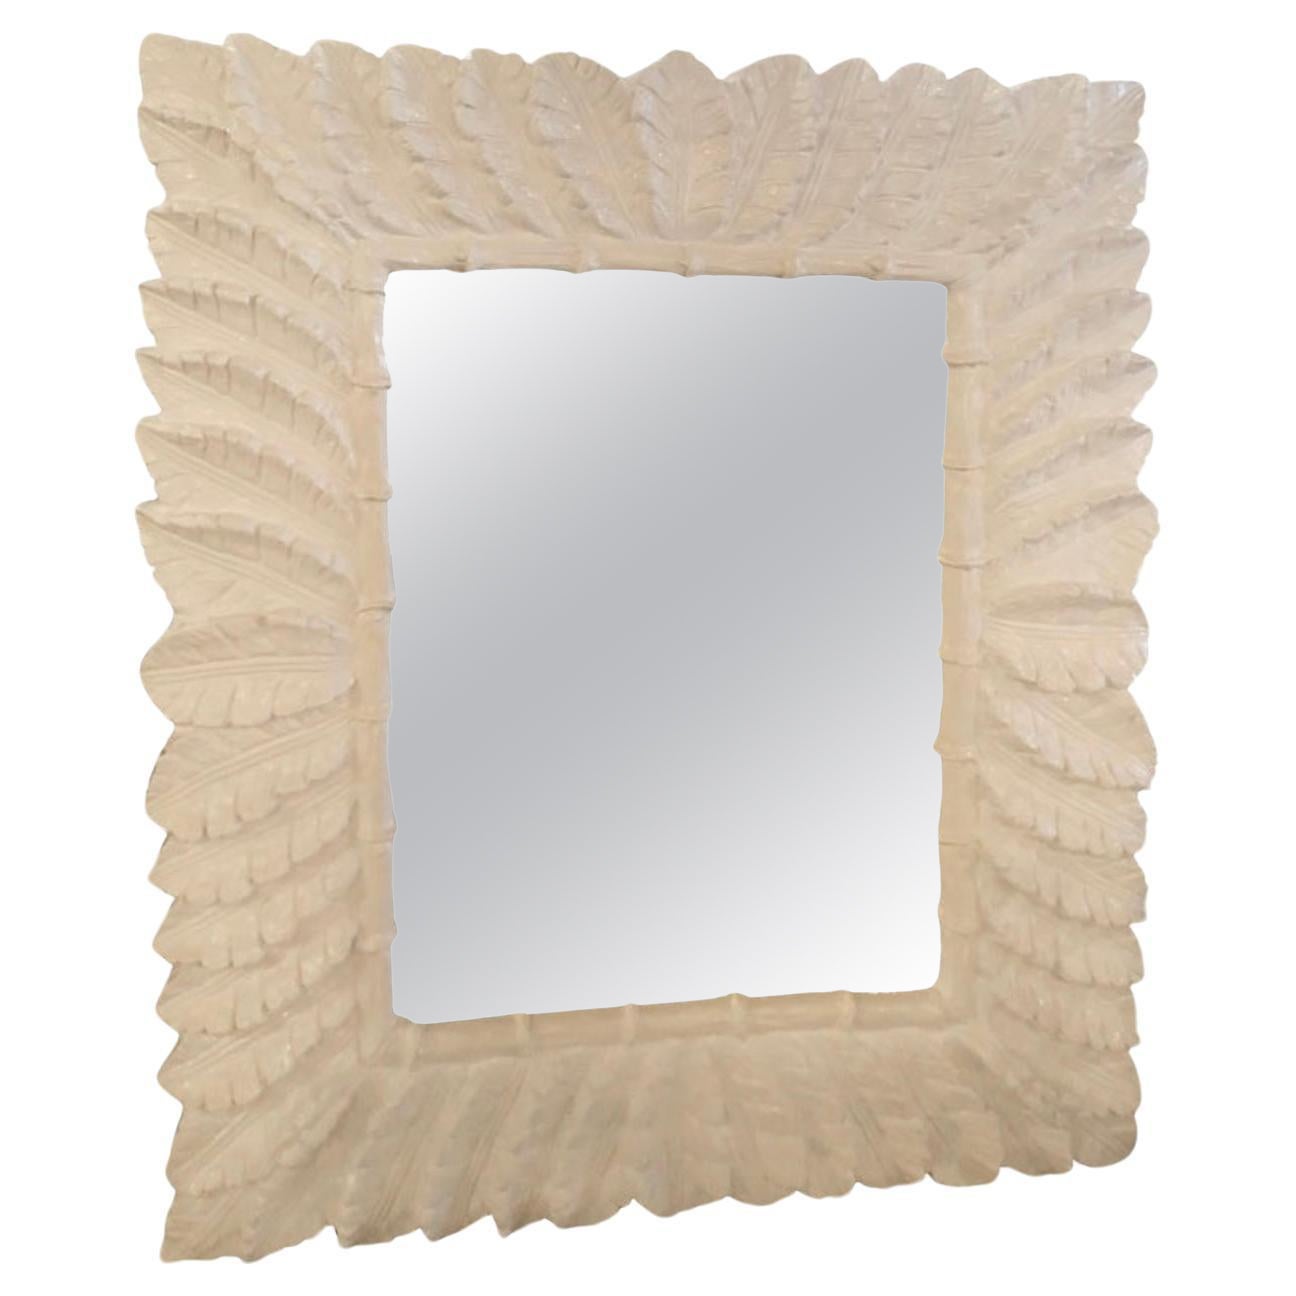 White Lacquered Tropical Palm Tree Leaf Wall Mirror Faux Bamboo